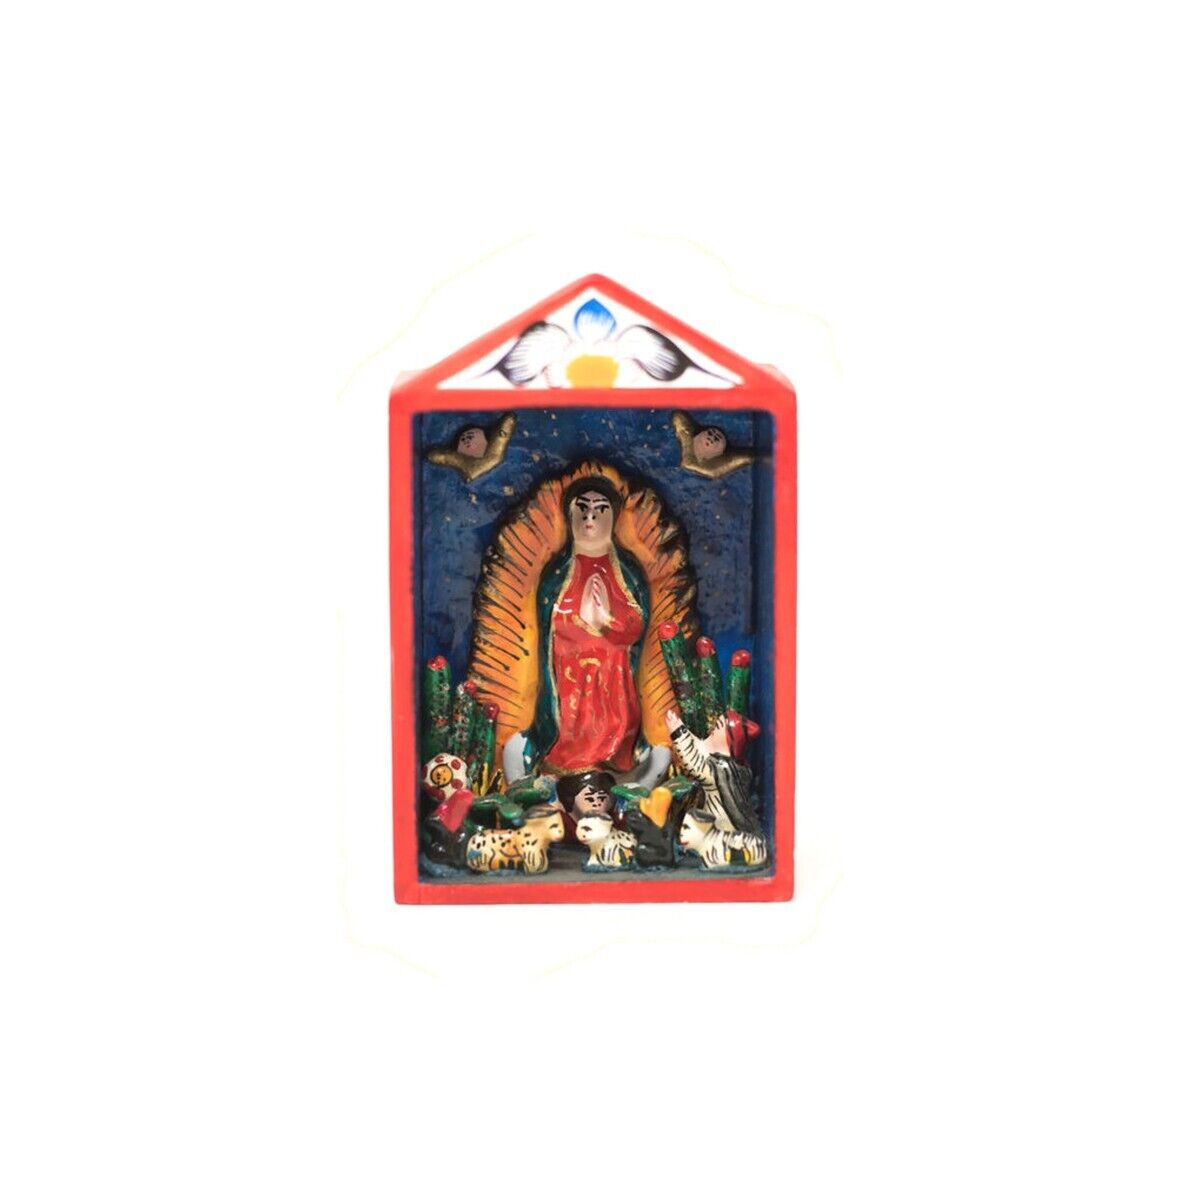 Hand Painted Peruvian Folk Art, Our Lady of Guadalupe Retablo, Vintage Religious